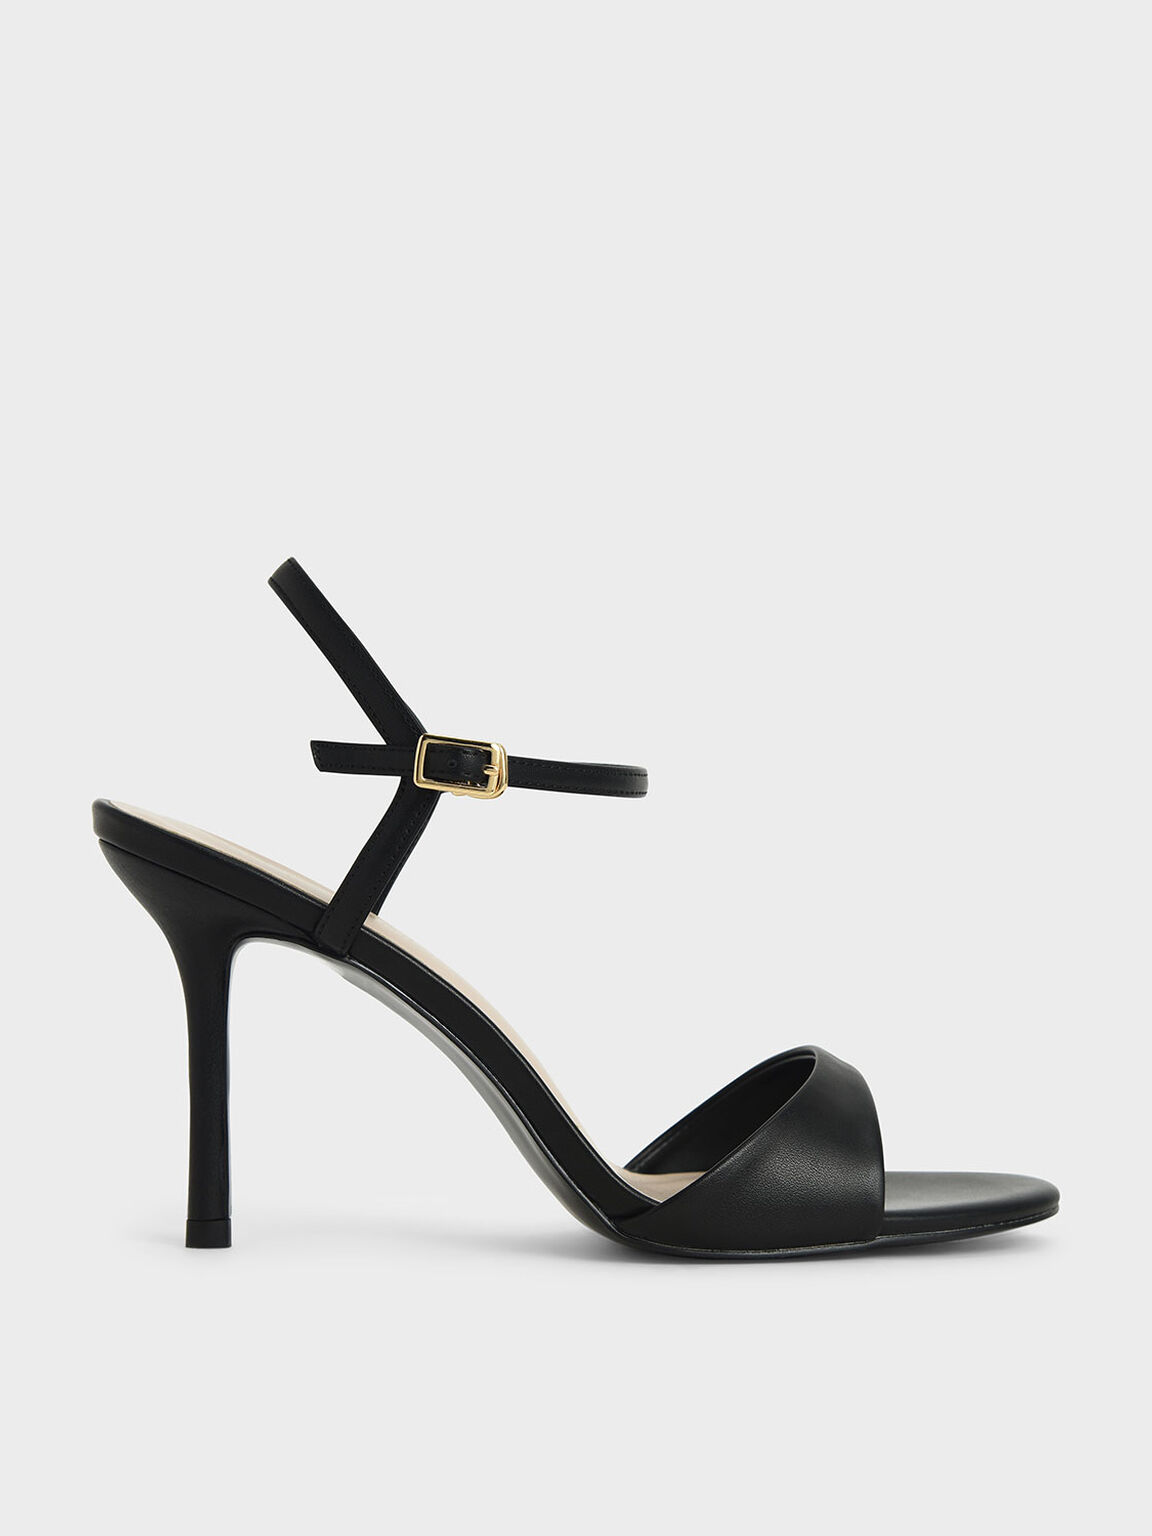 Black Ankle Strap Stiletto Sandals | CHARLES & KEITH US